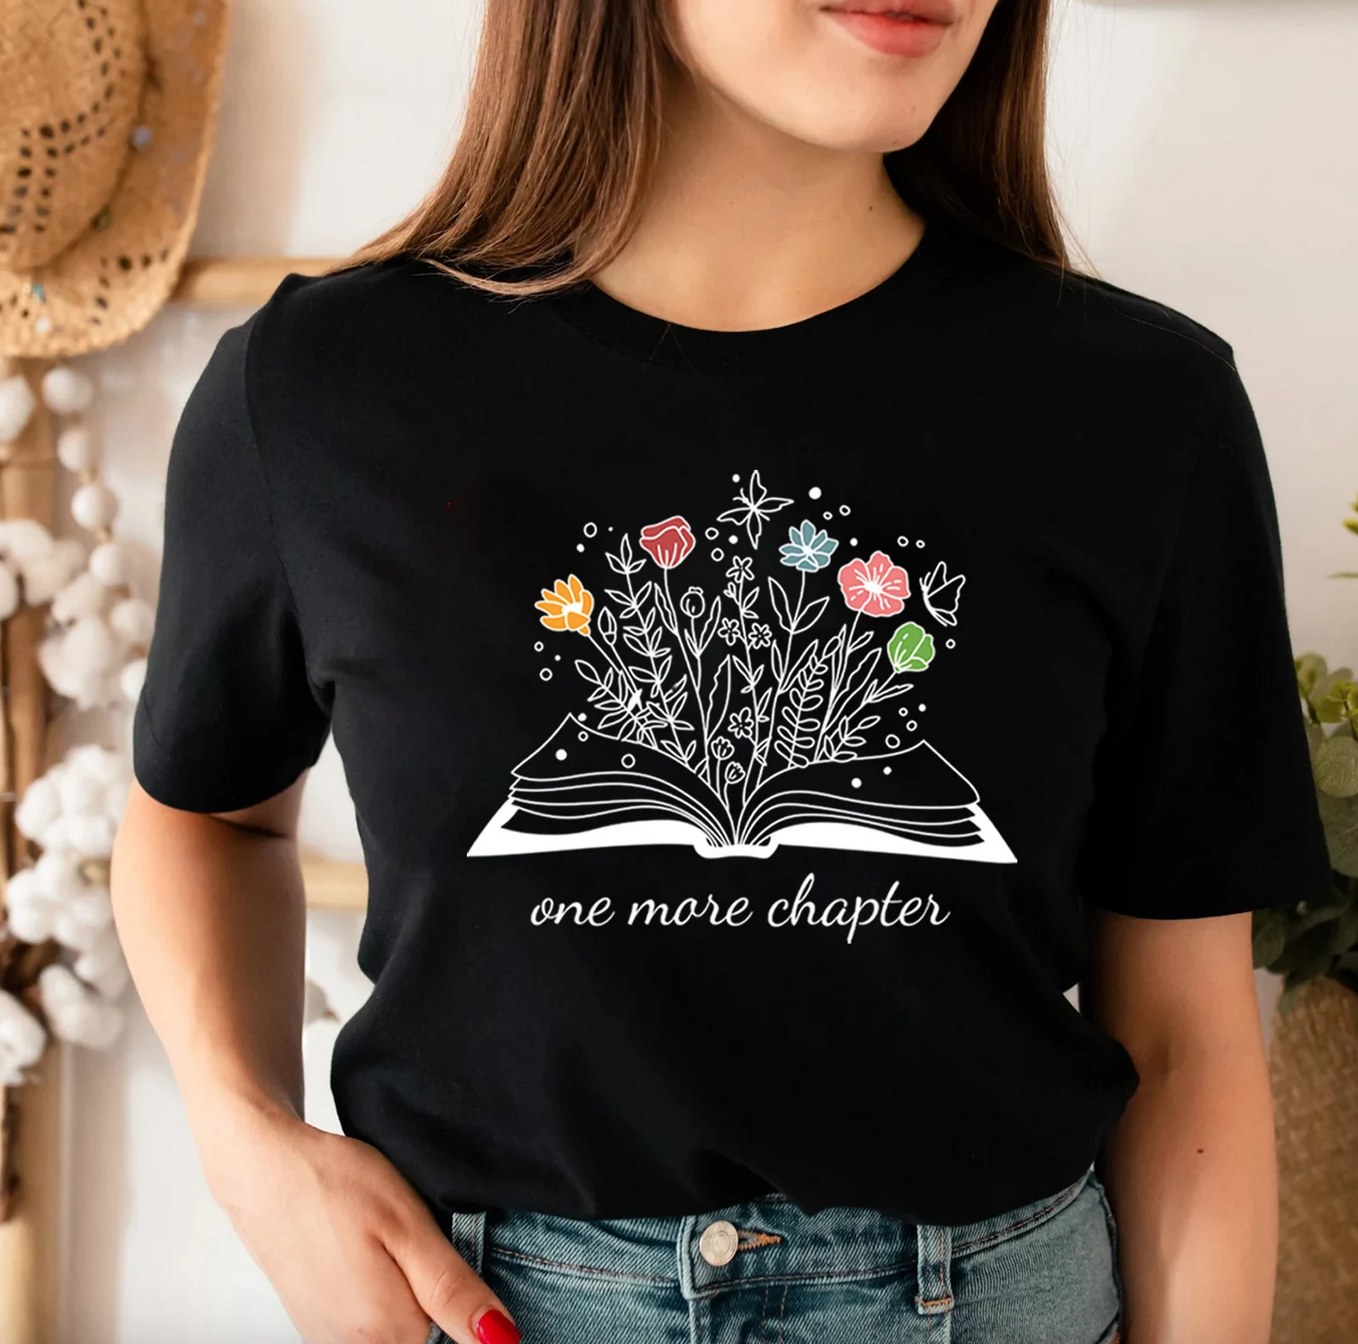 Black T-shirt with a print of an open book with flowers growing out of it and the text "one more chapter"